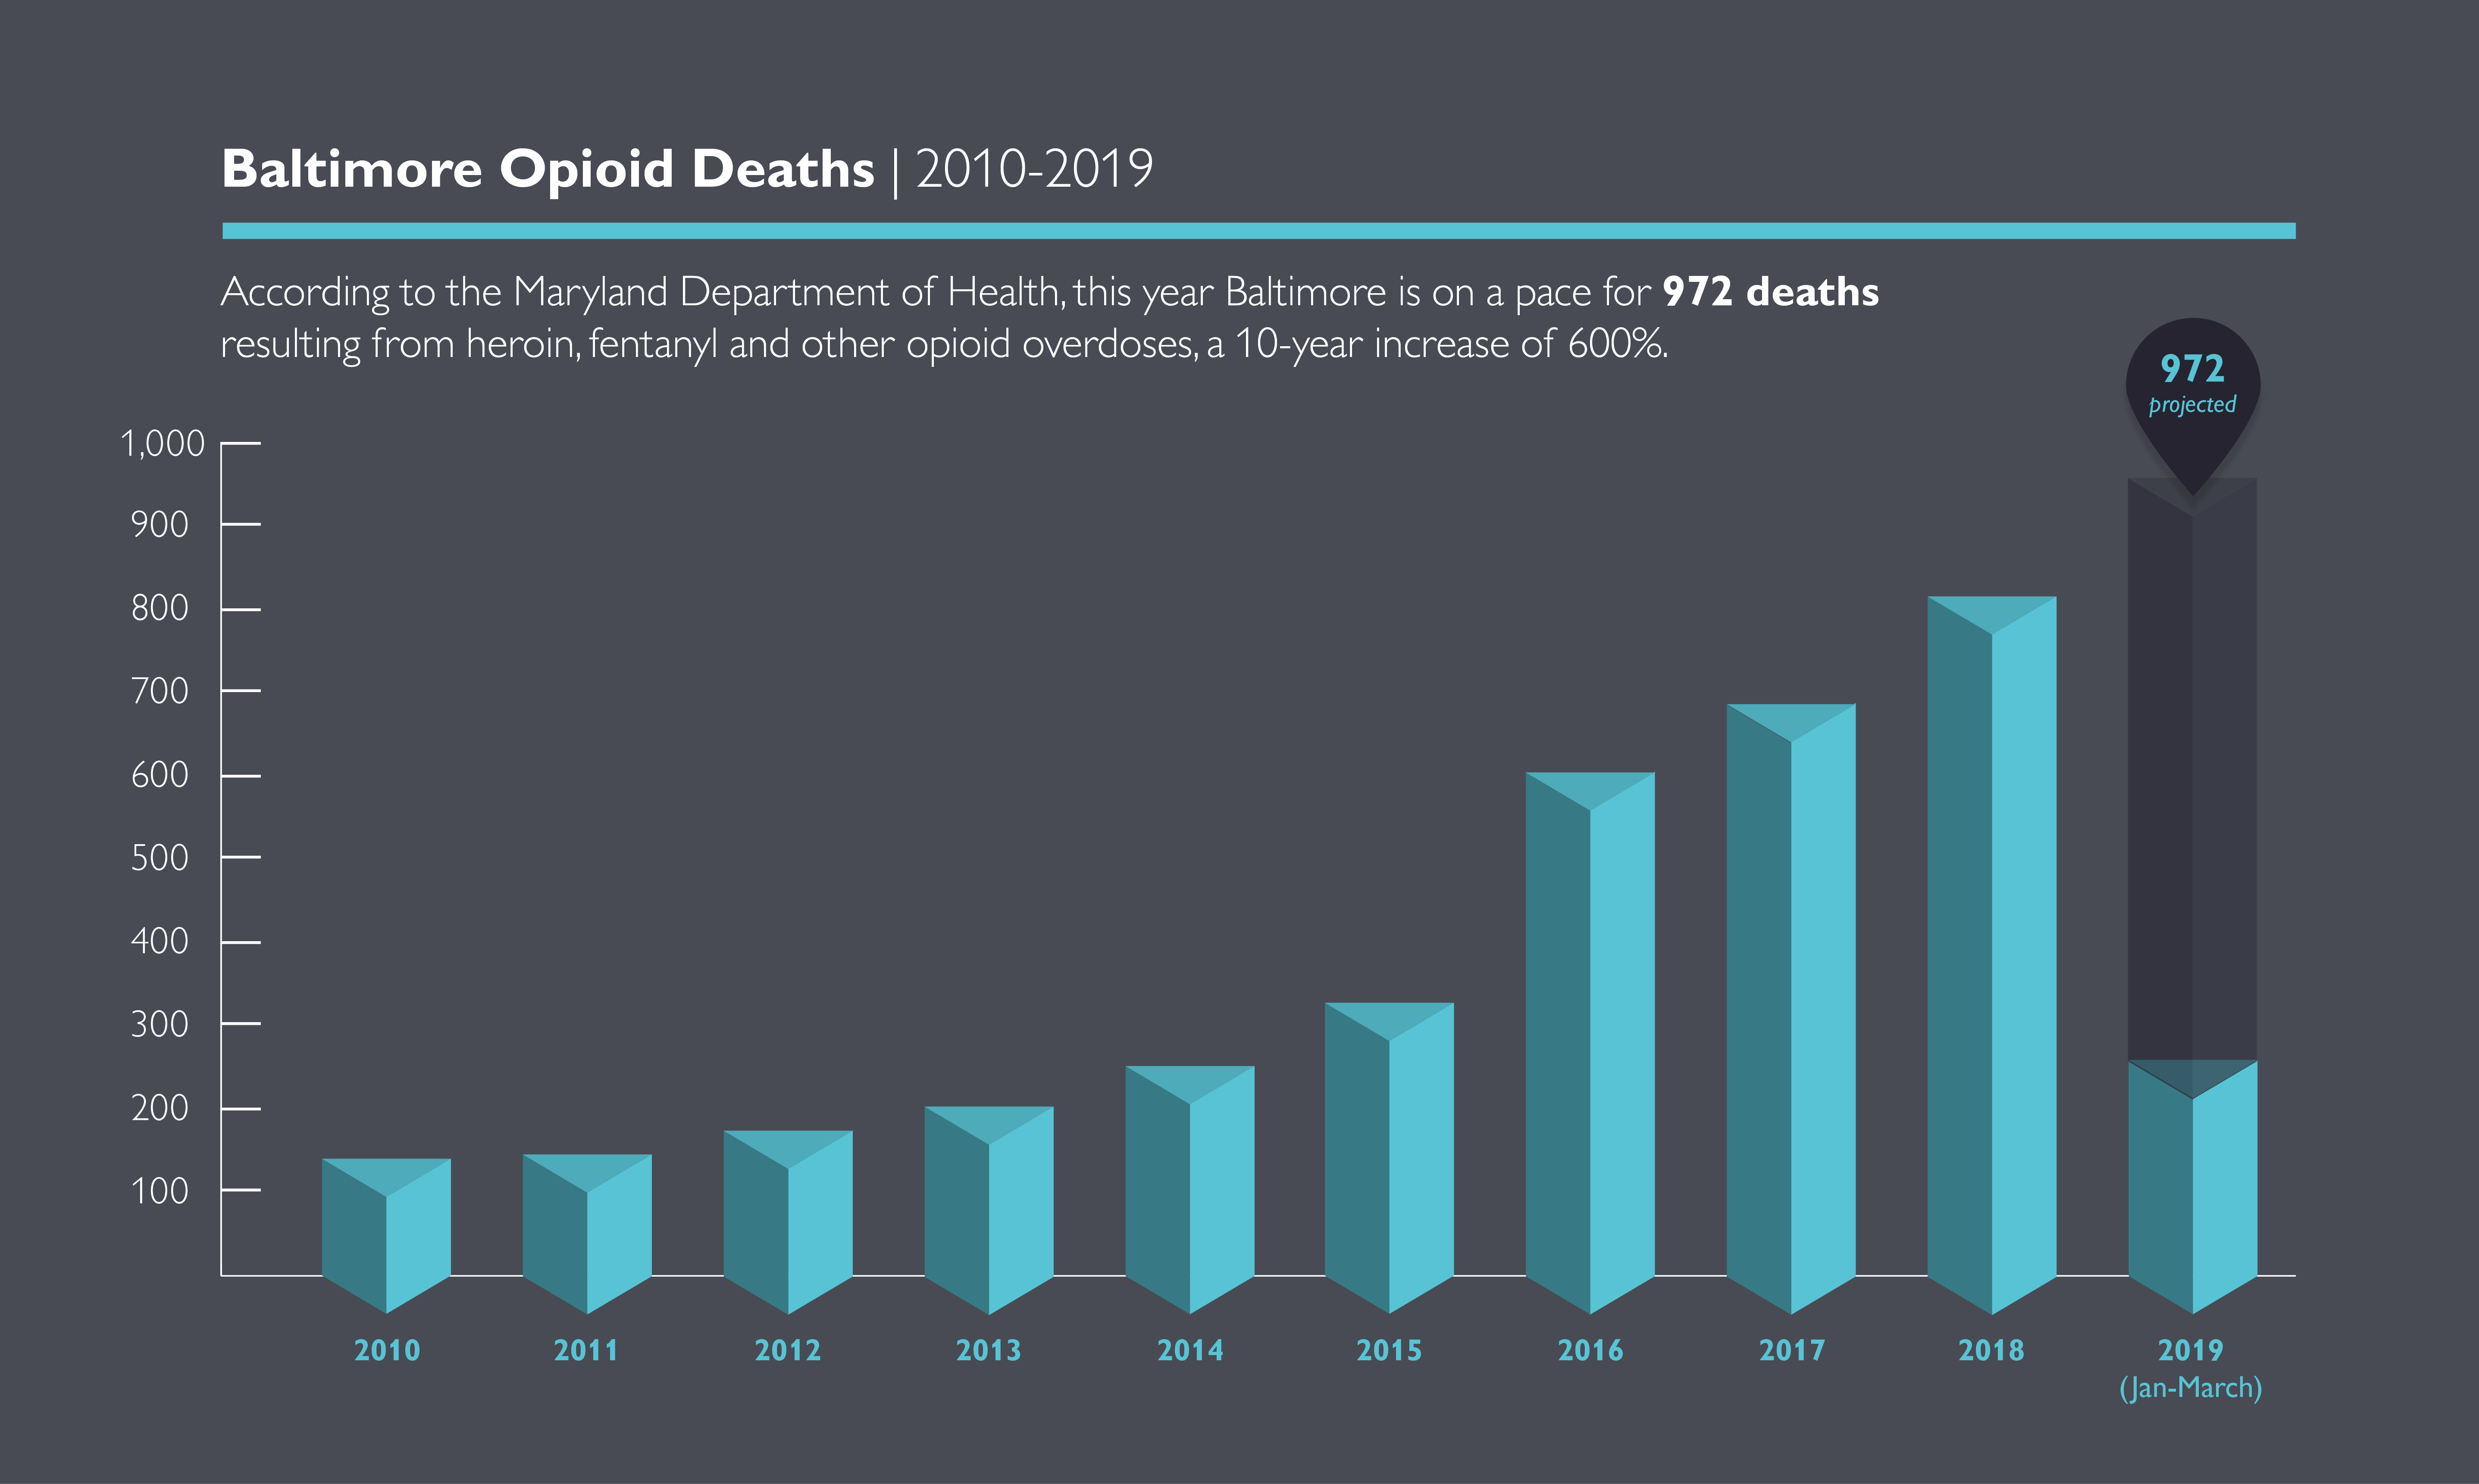 This year, Baltimore is on a pace for 972 deaths resulting from heroin, fentanyl and other opioid overdoses, a 10-year increase of 600%. The source is Maryland Department of Health.